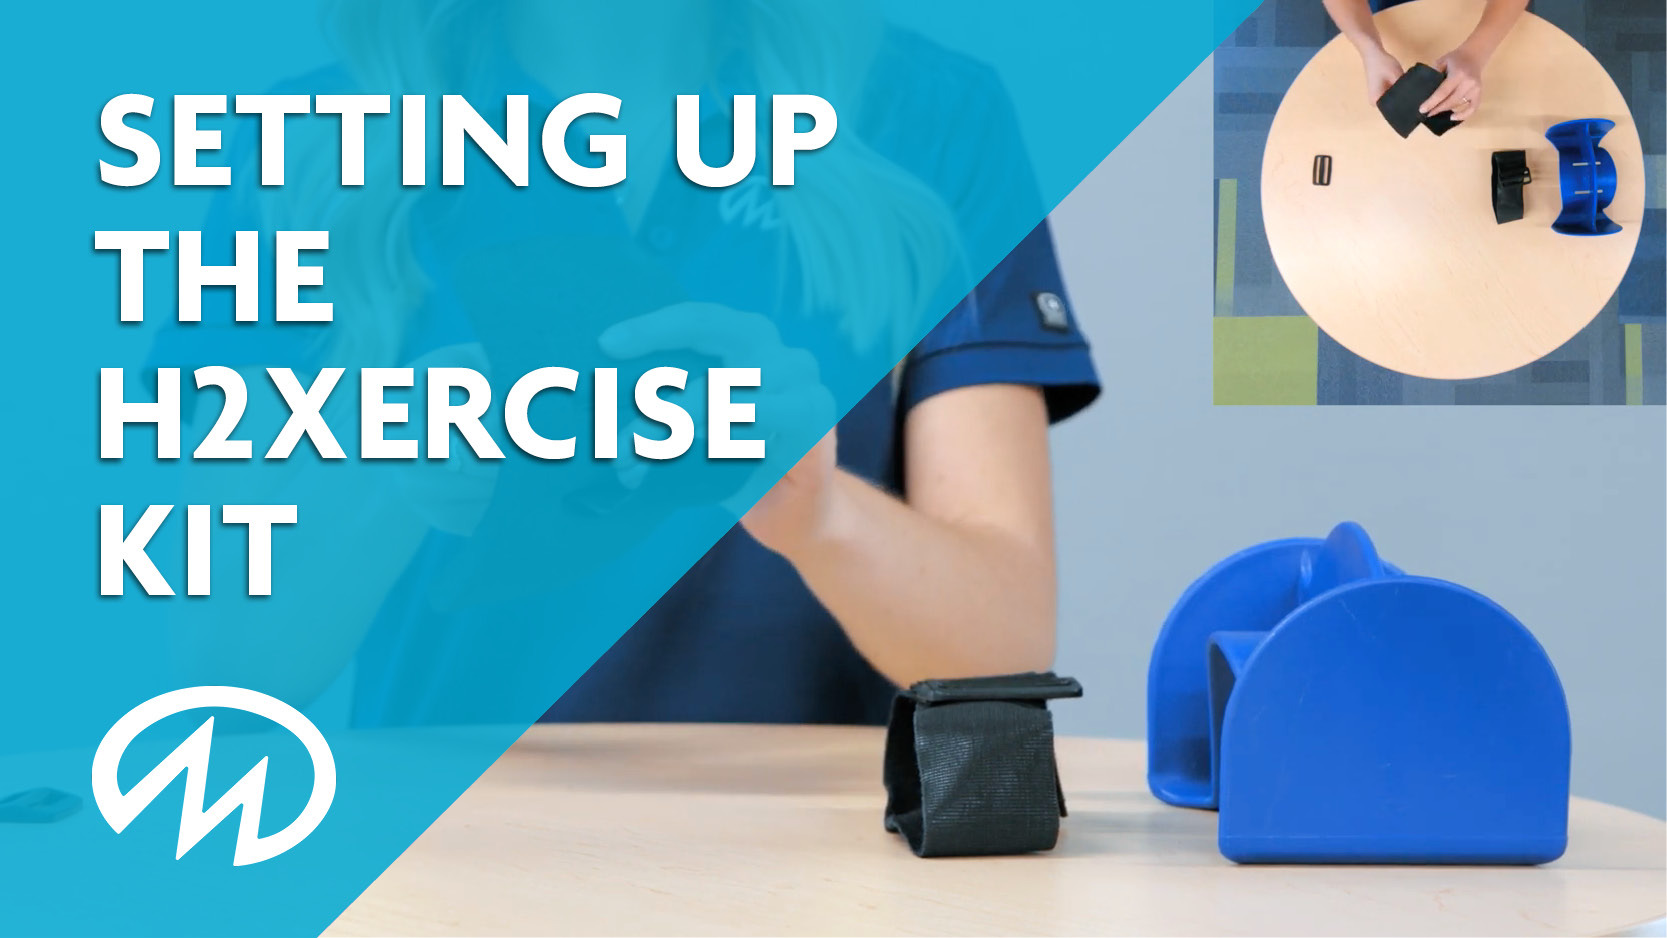 How to set up your h2xercise kit